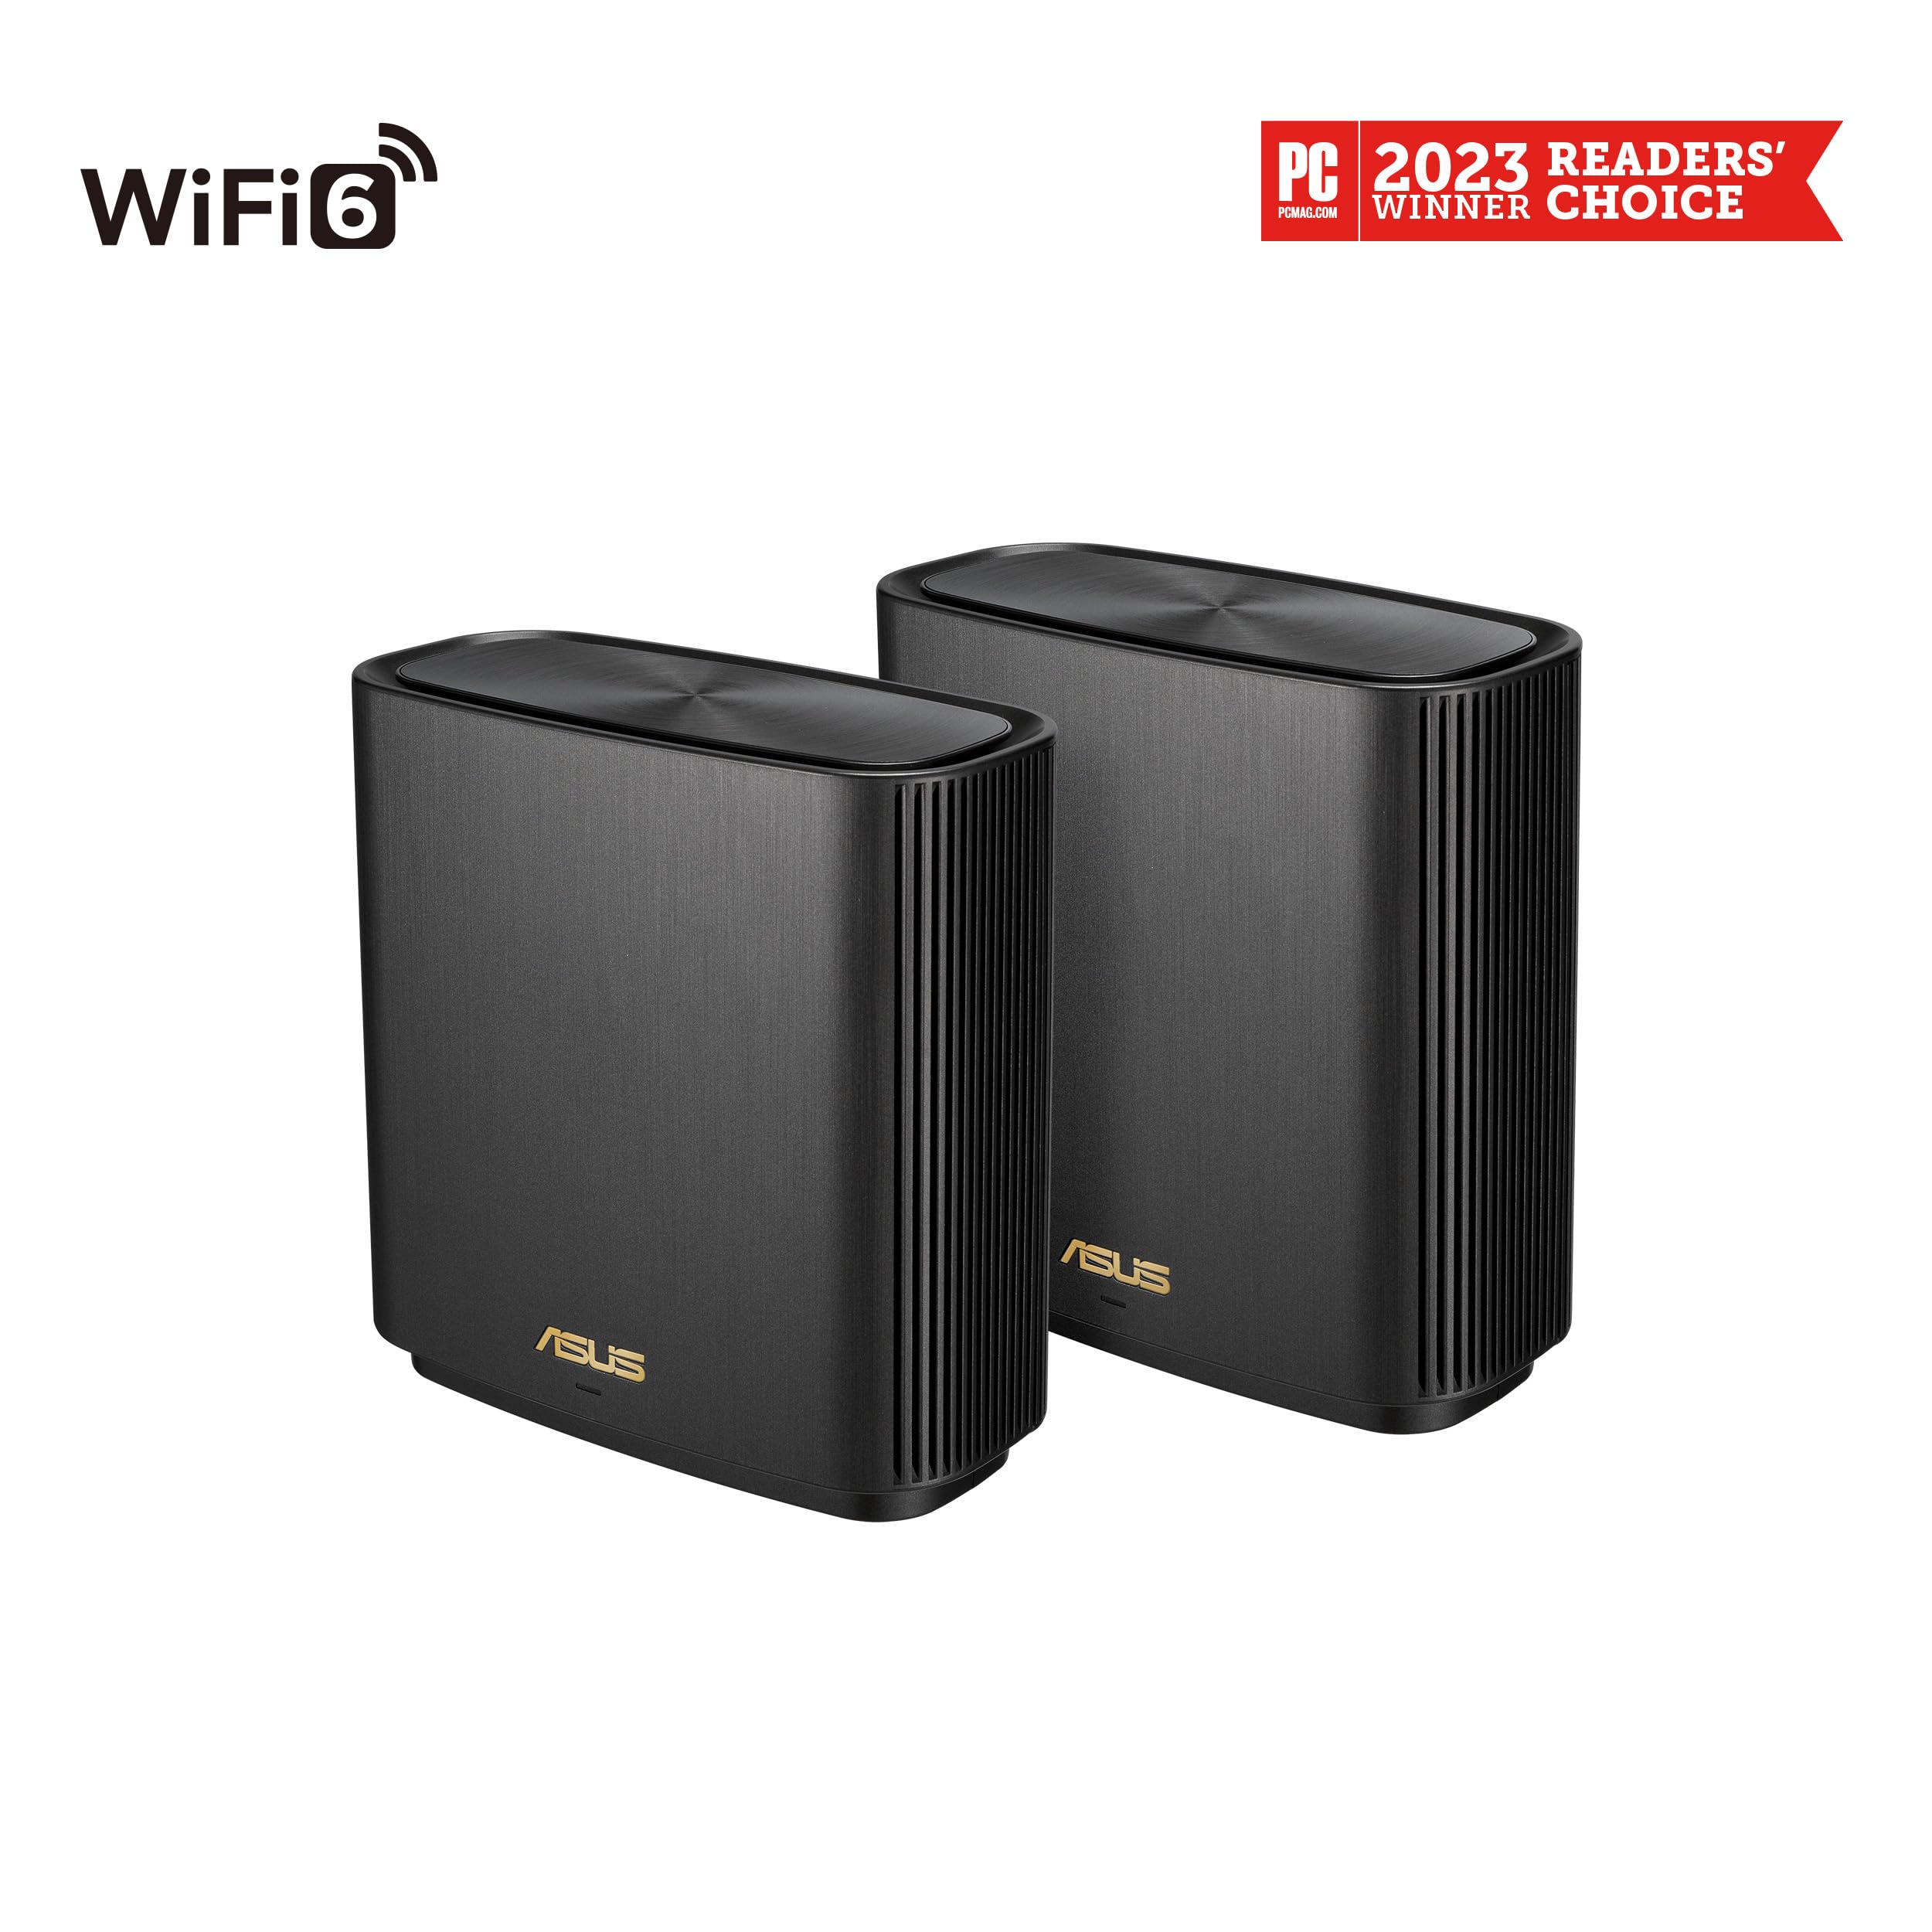 ASUS ZenWiFi AX Whole-Home Tri-band Mesh WiFi 6 System (XT8) - 2 pack, 6.6Gbps, WiFi, 2.5G port - $130